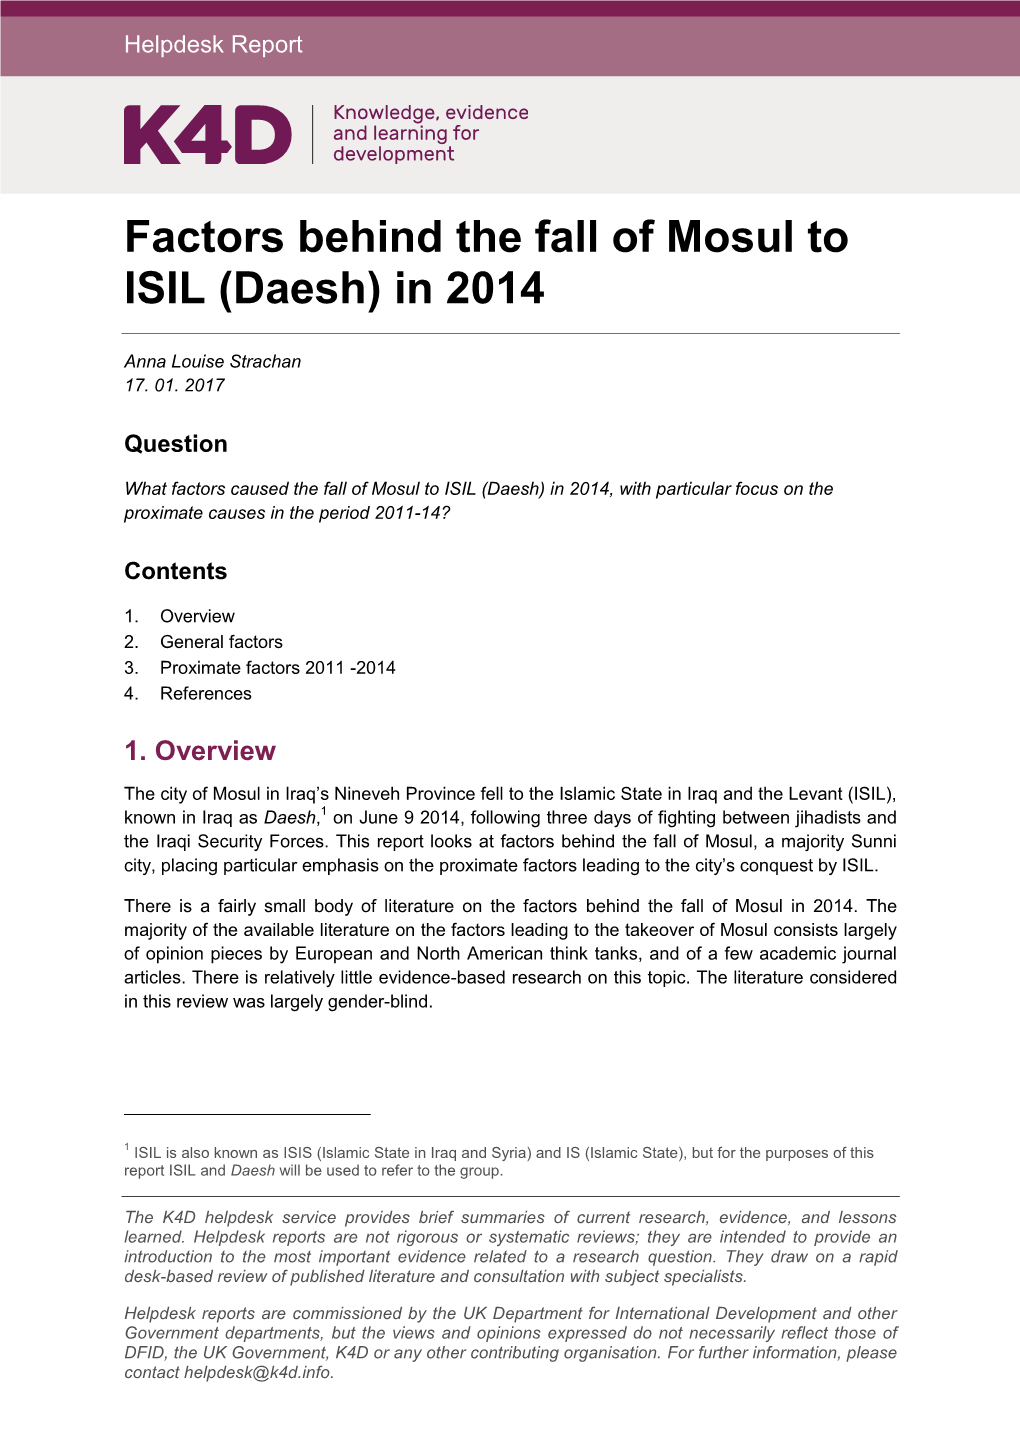 Factors Behind the Fall of Mosul to ISIL (Daesh) in 2014